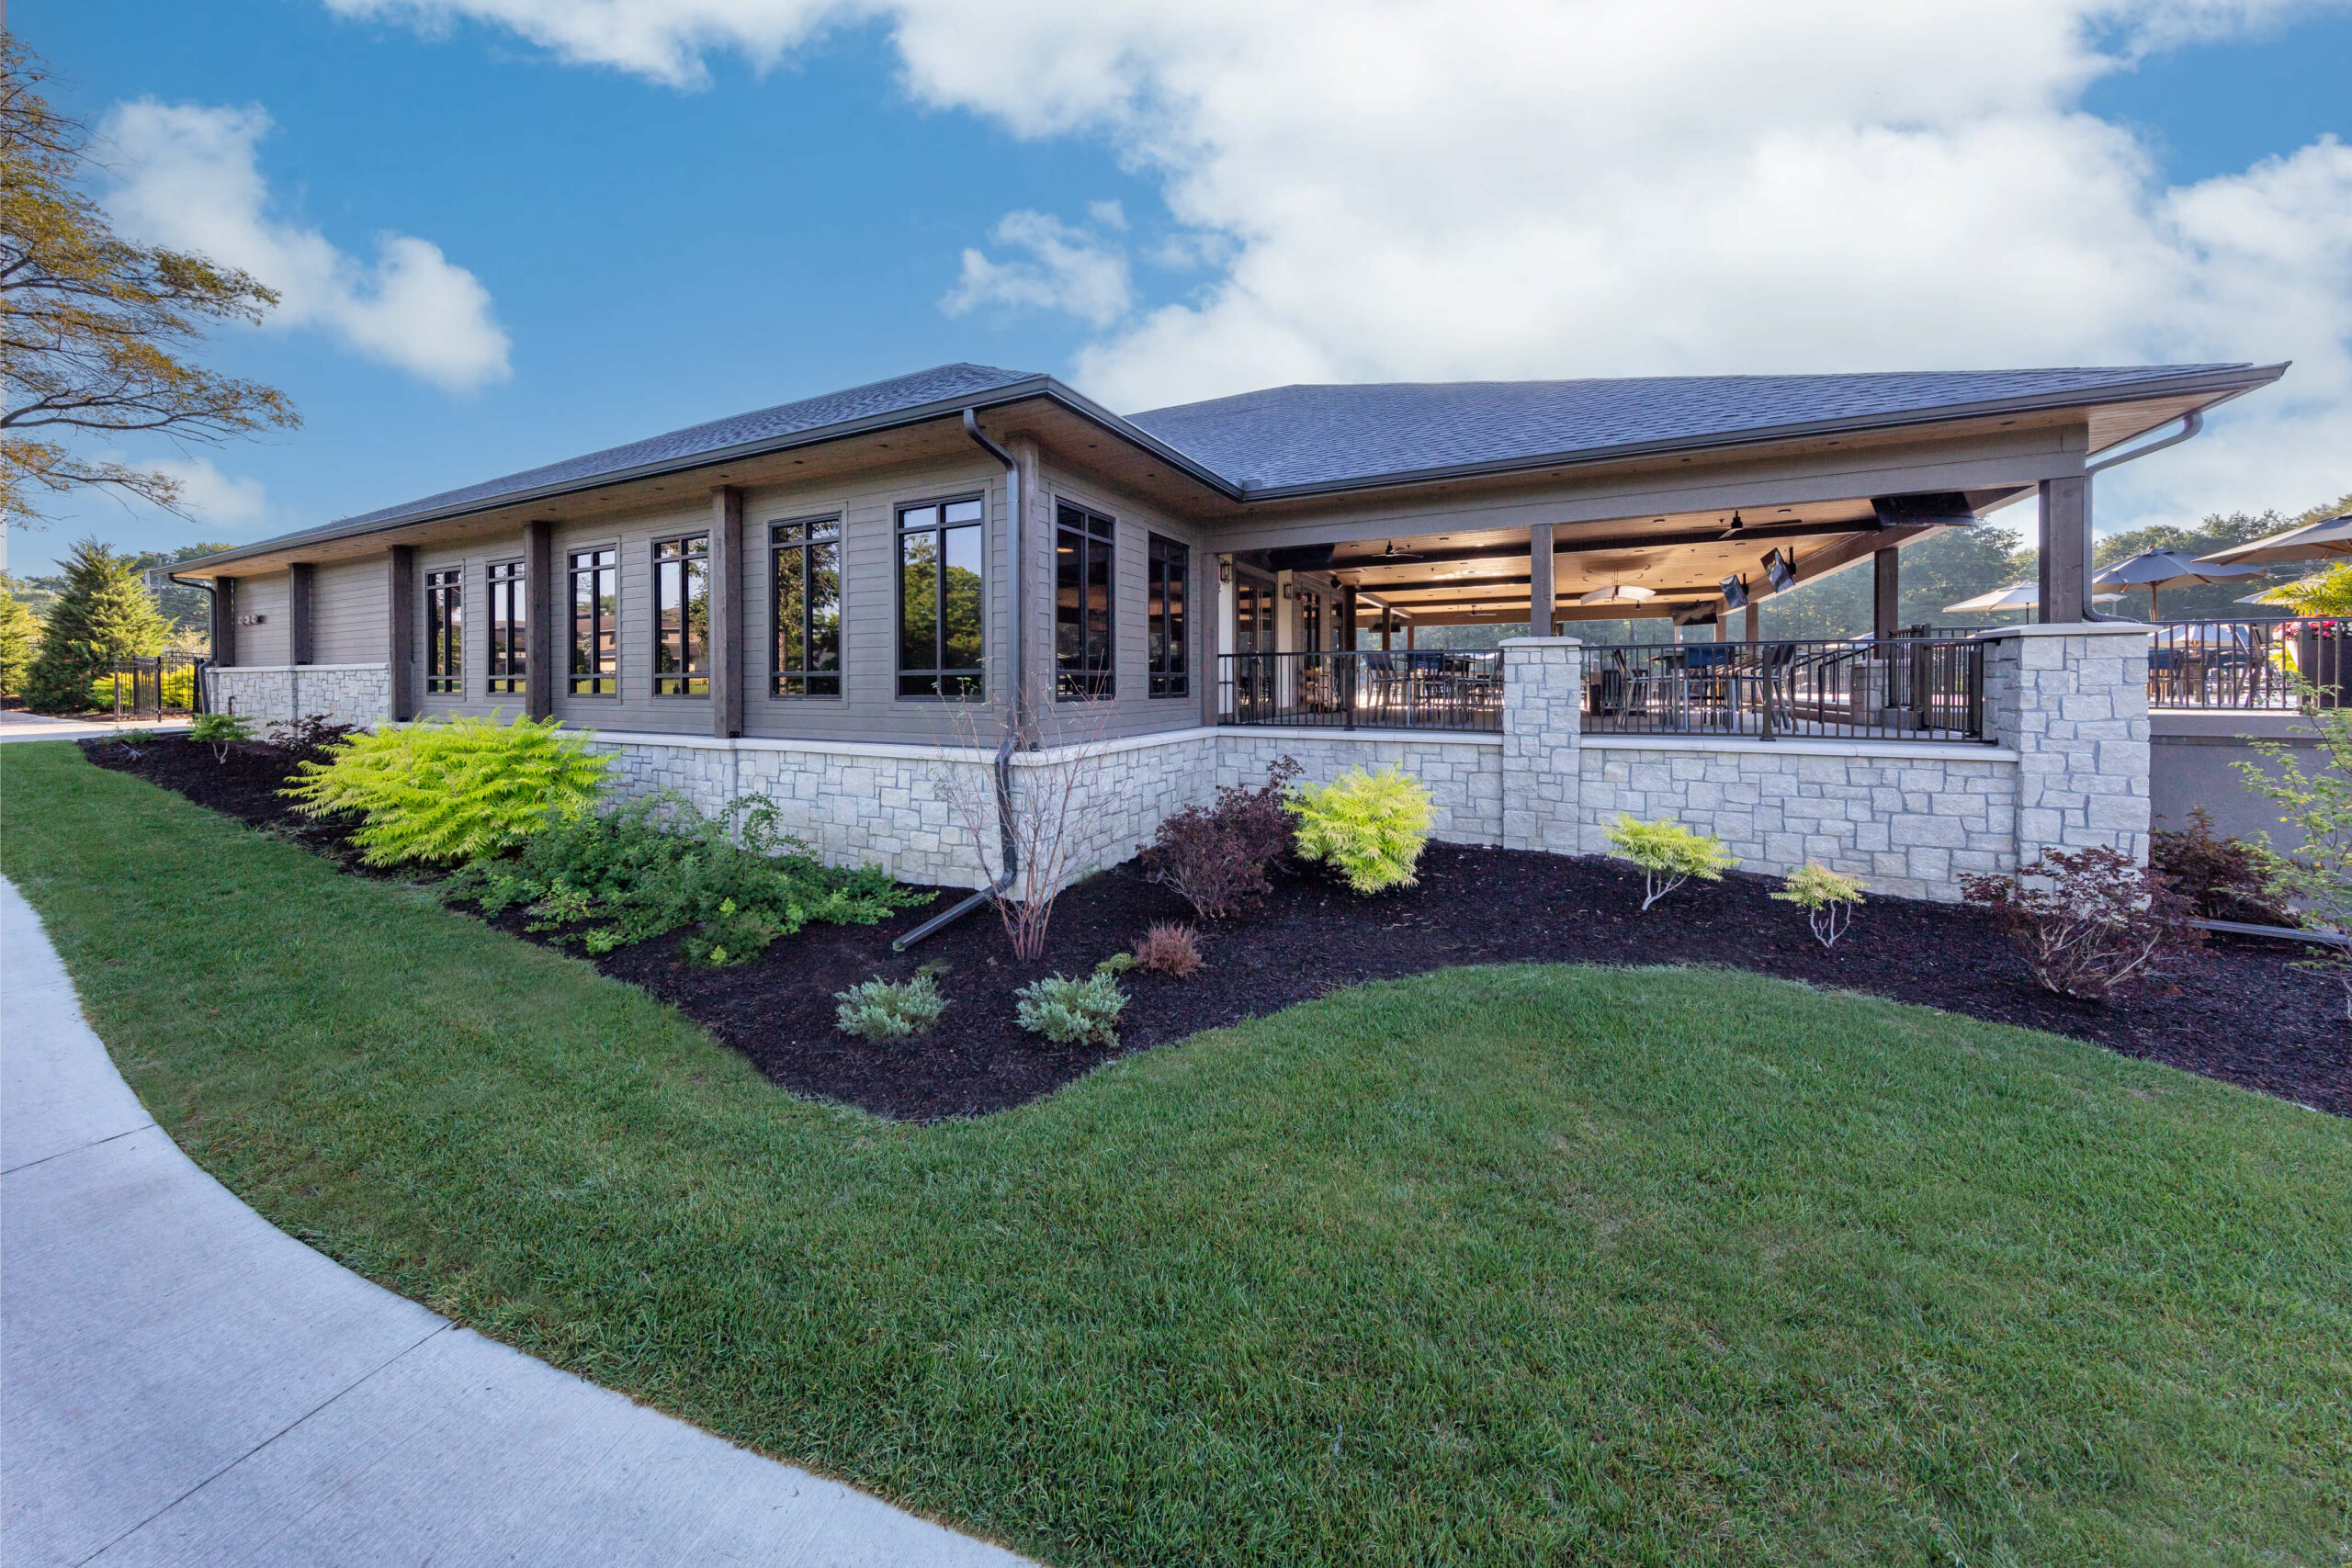 Milburn Country Club For Rose Design Build By Archphotokc 2